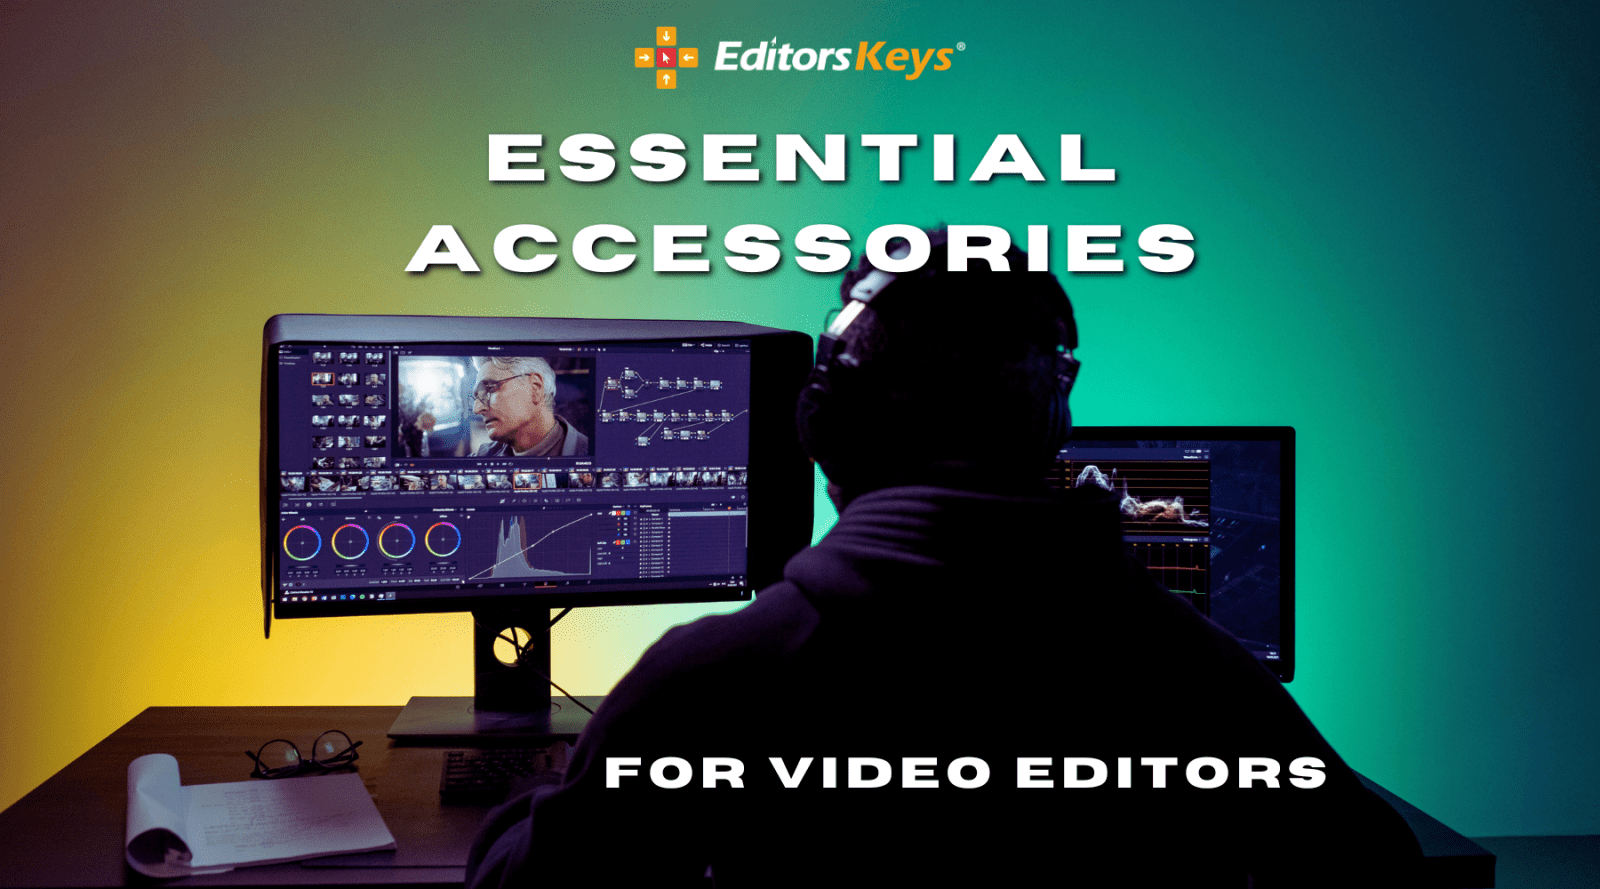 Essential Accessories That Every Video Editor Needs - Editors Keys